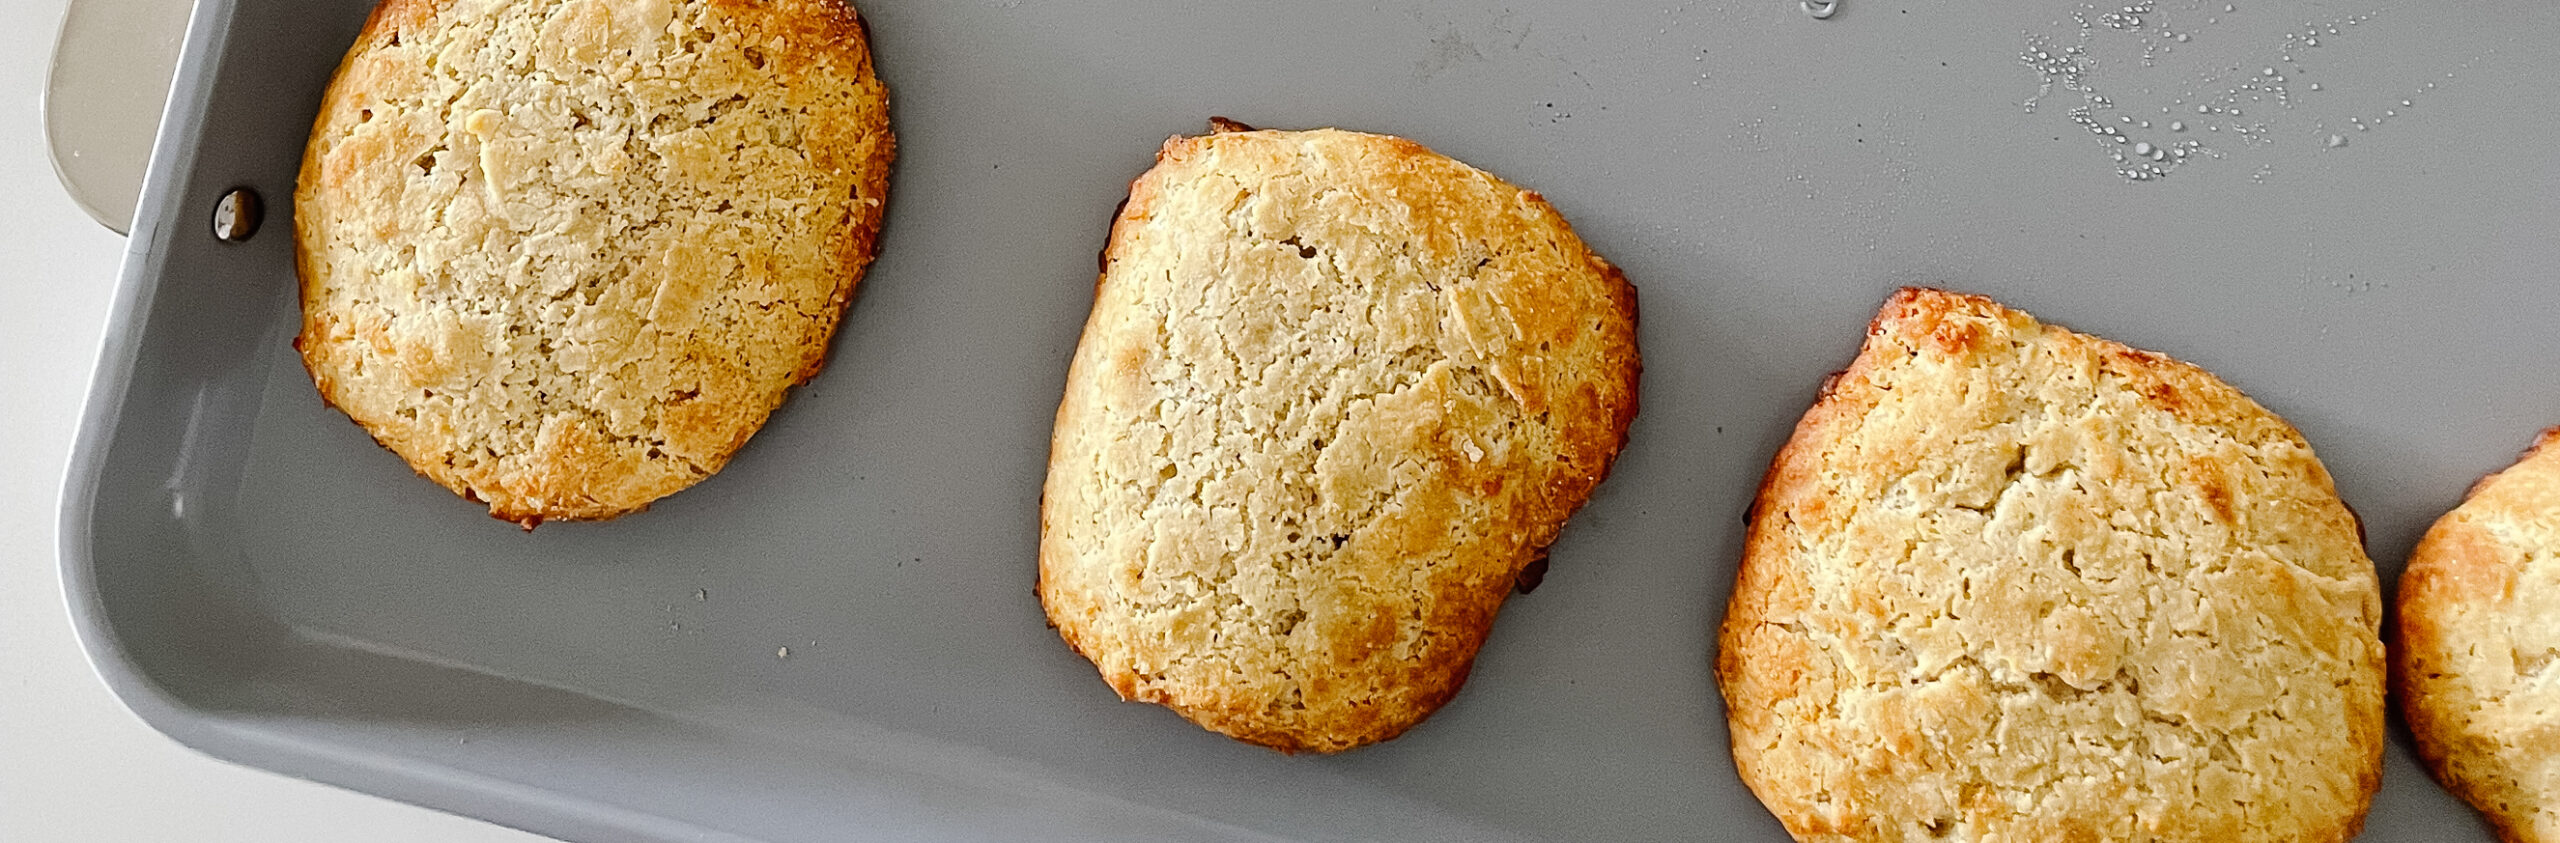 gluten-free biscuits on a baking sheet